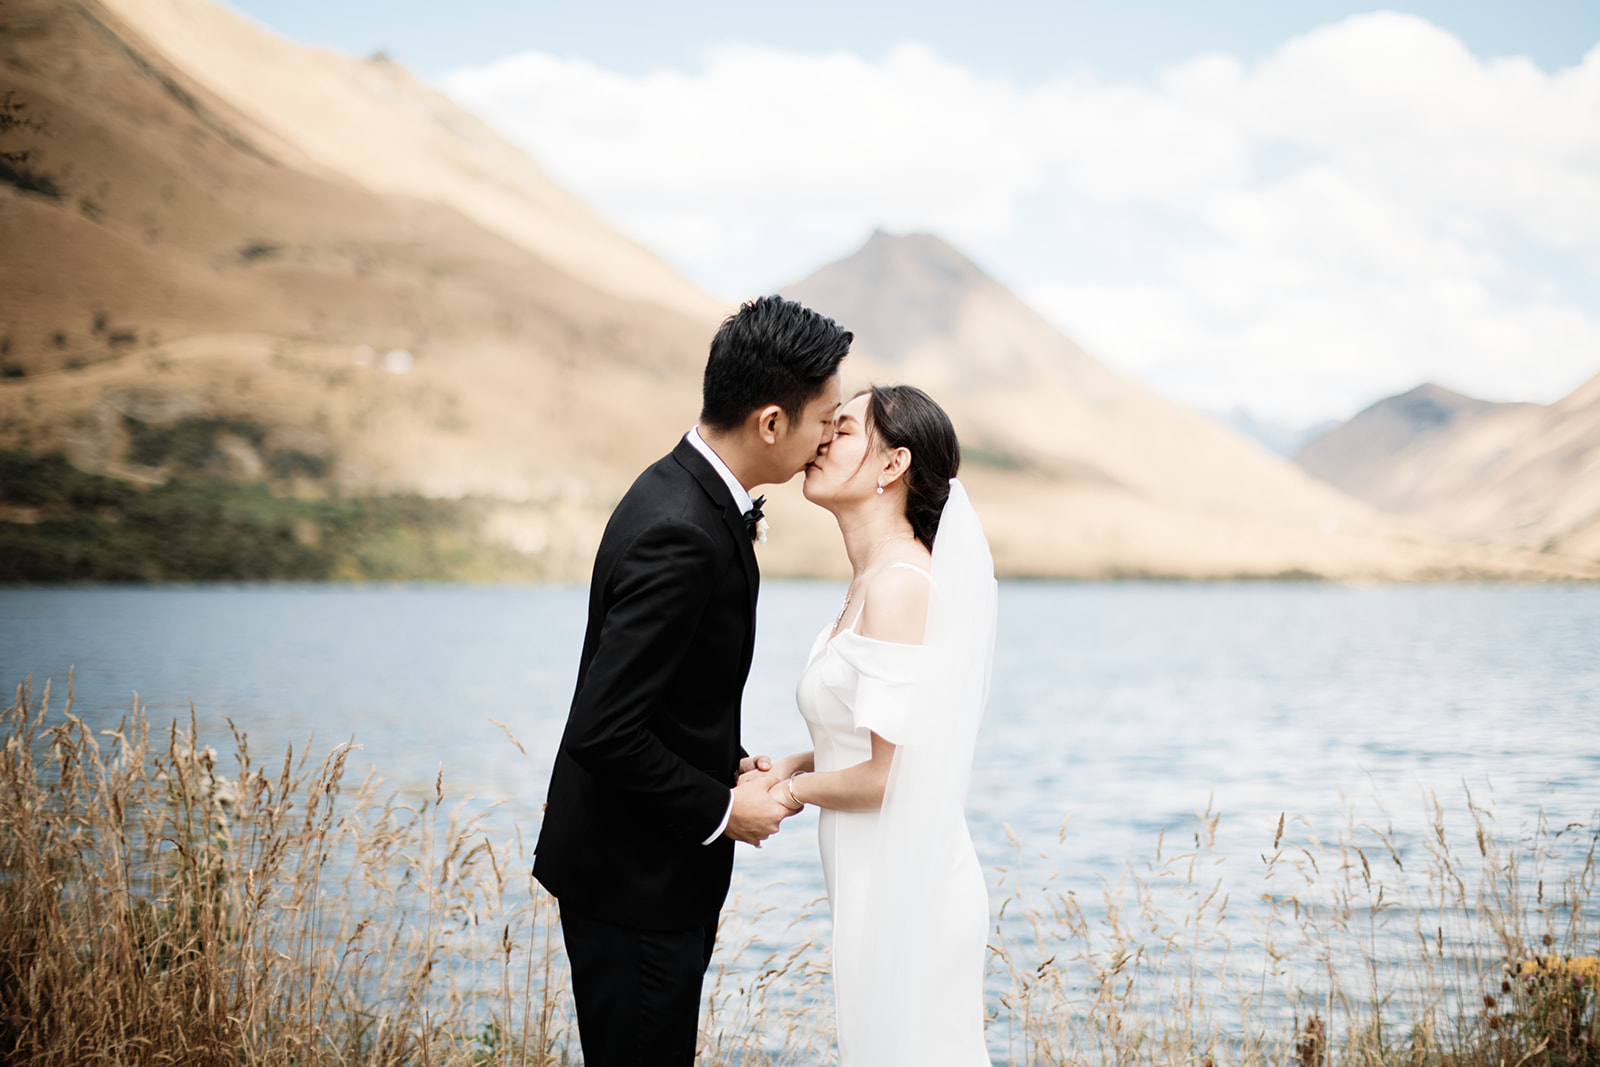 A bride and groom, Dios & Carlyn, share a romantic kiss at Cecil Peak in Queenstown during their Heli Pre Wedding shoot.